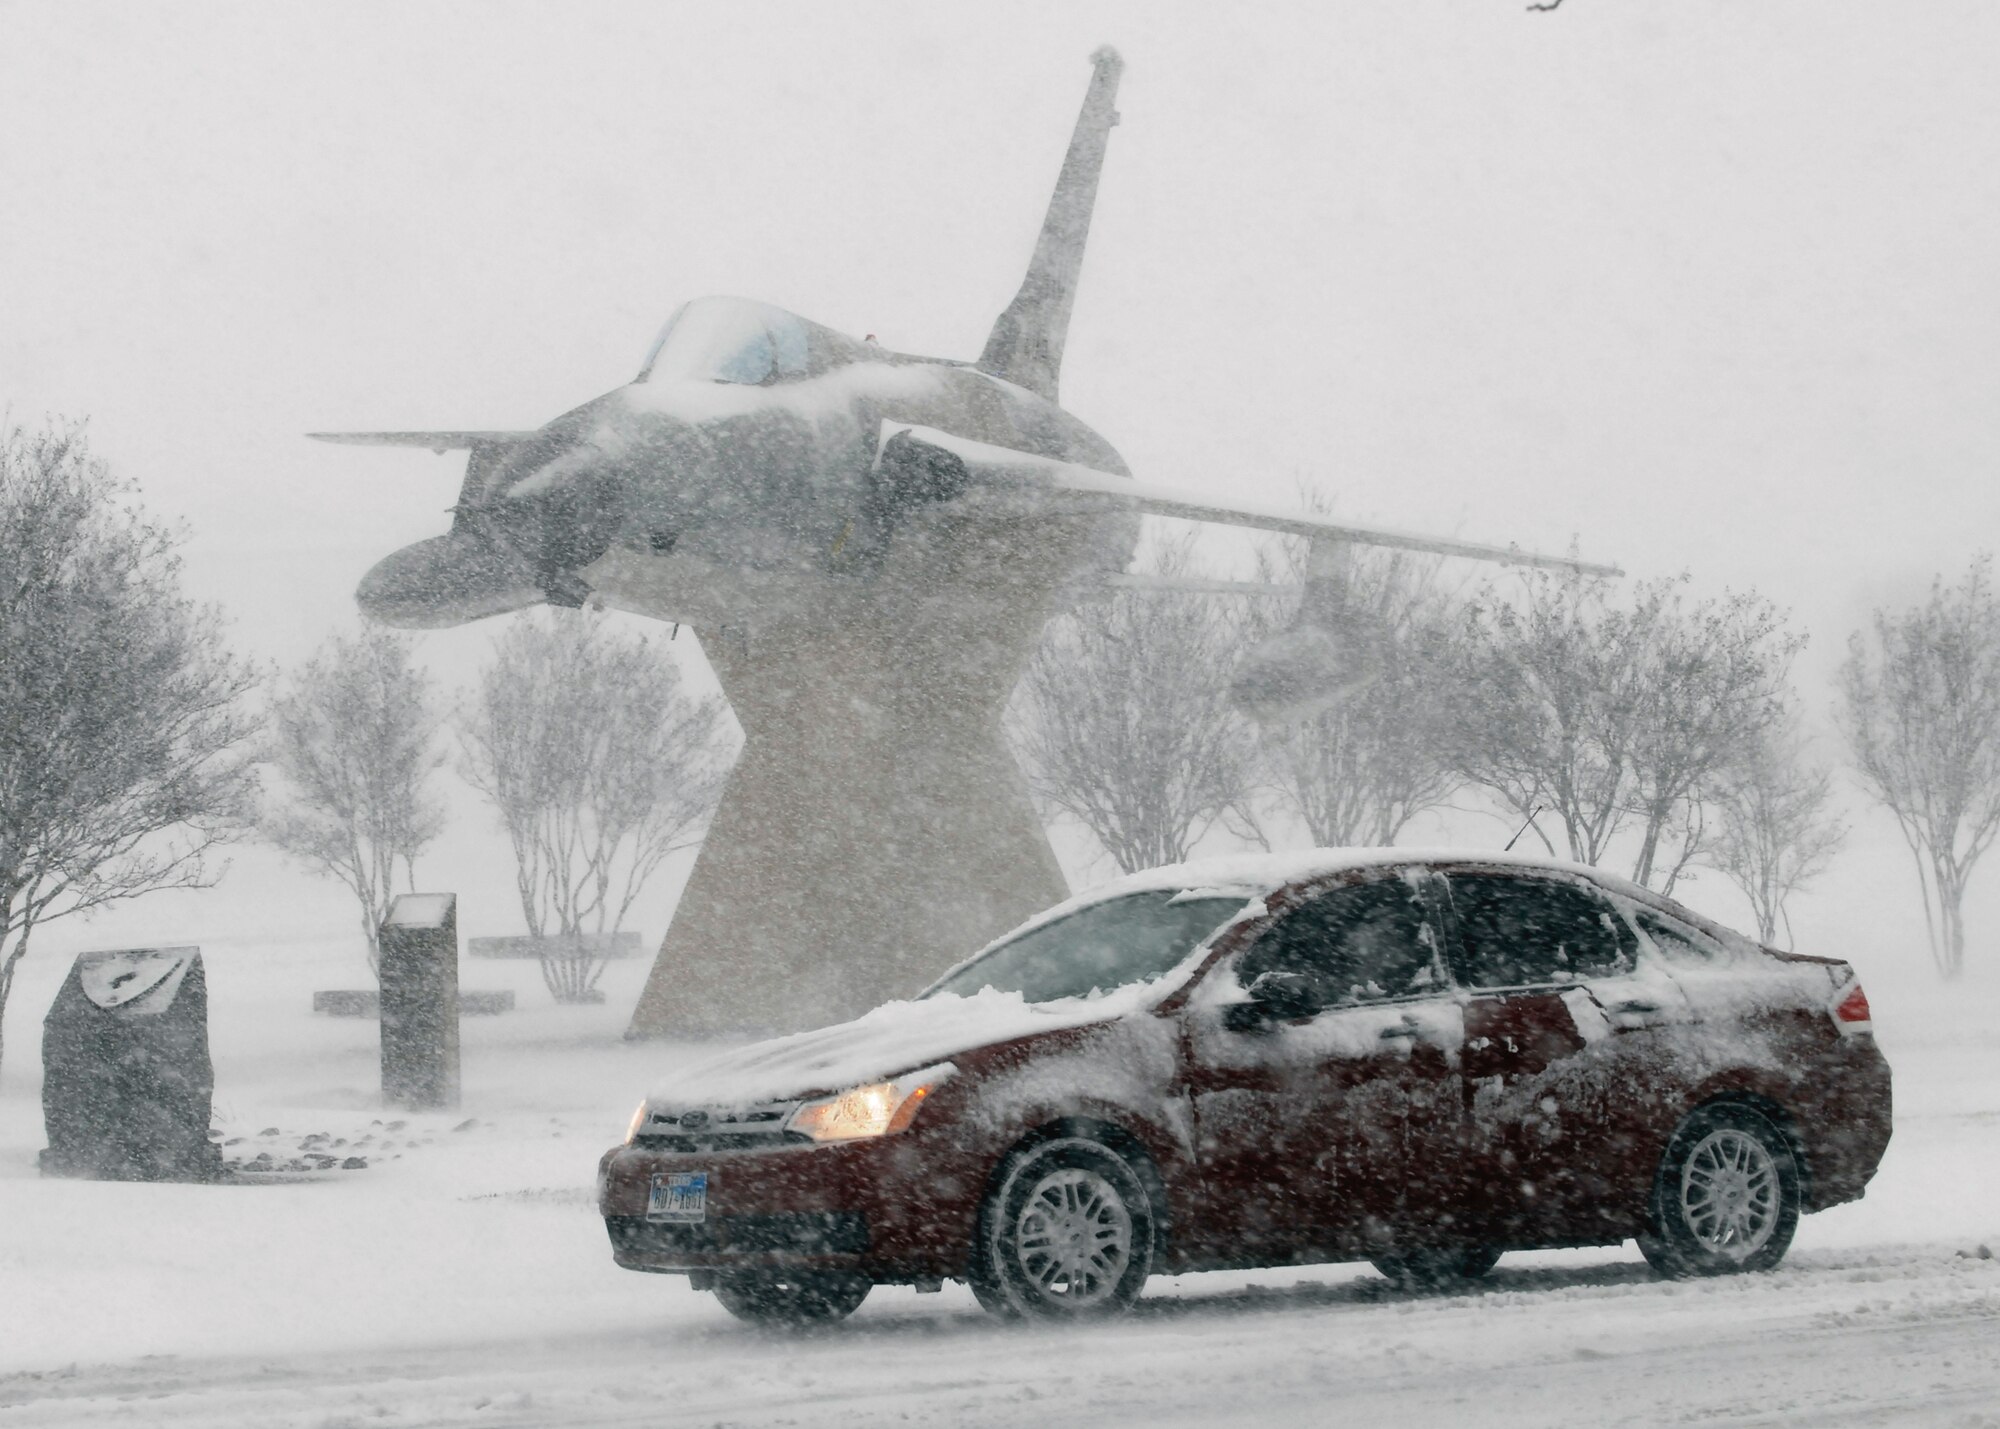 A motorist on Sheppard Air Force Base, Texas, takes is slow Dec. 24 as a heavy snow falls across the region. More than 10 inches of snow fell in the area, causing blizzard-like conditions. (U.S. Air Force photo/Harry Tonemah)